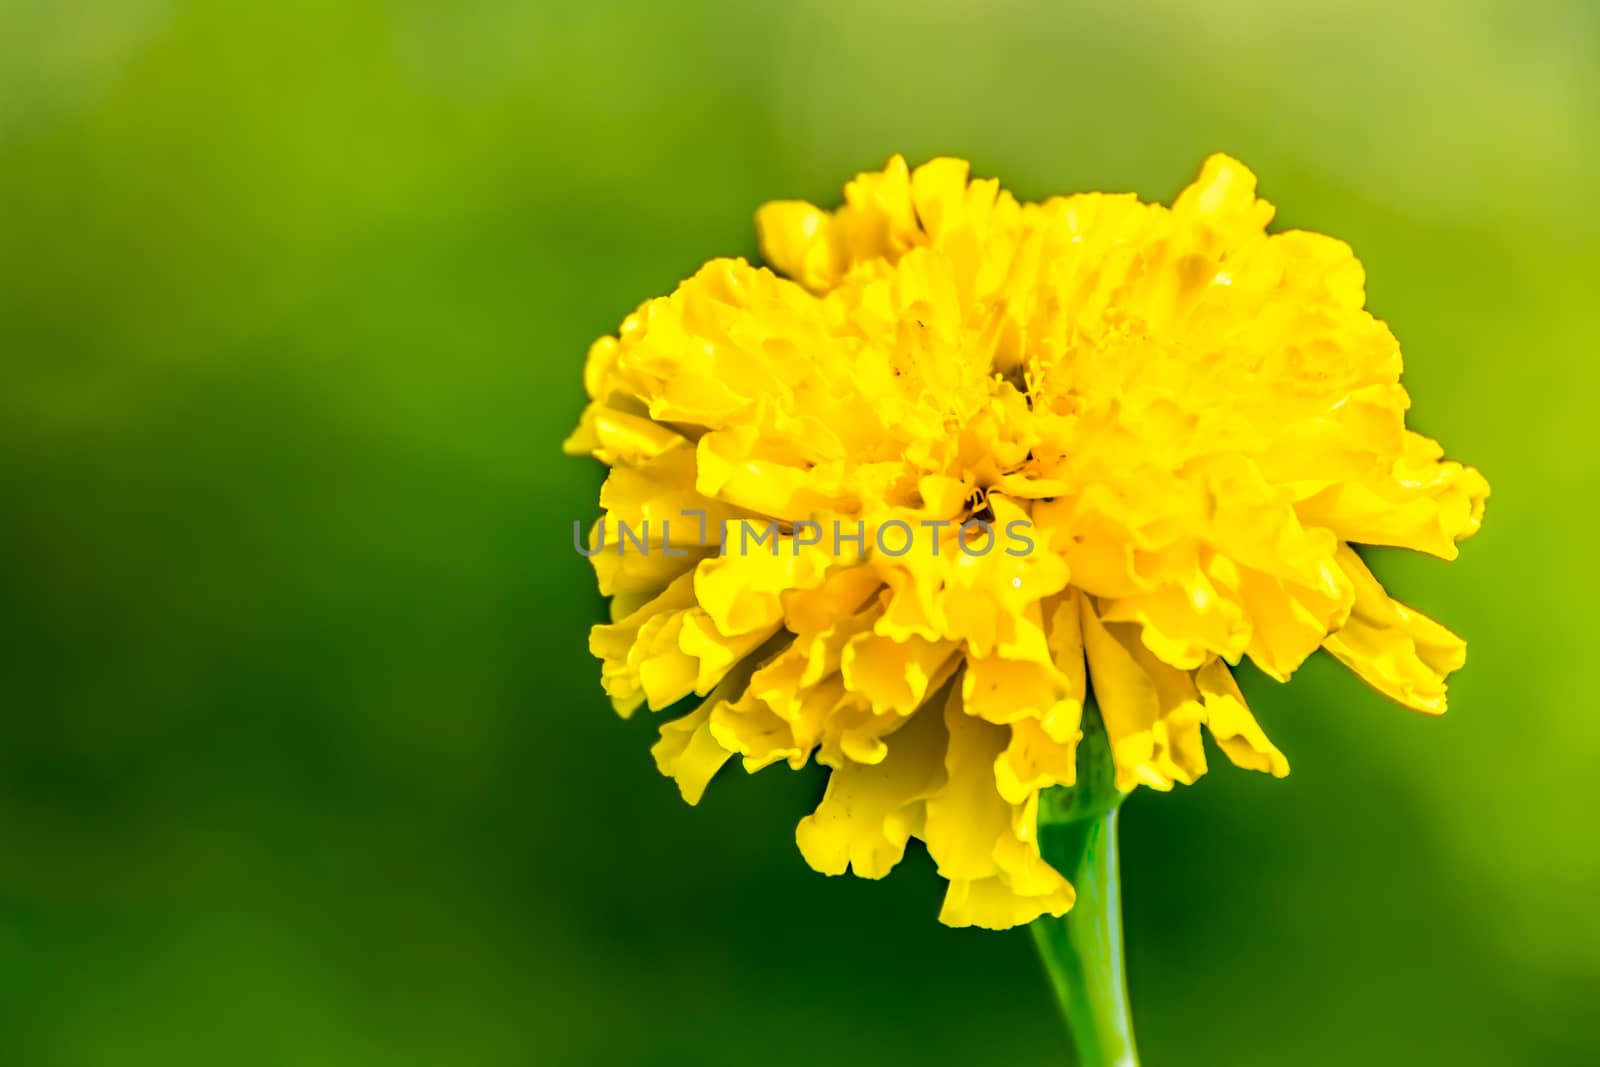 Marigold flower by pitchaphan